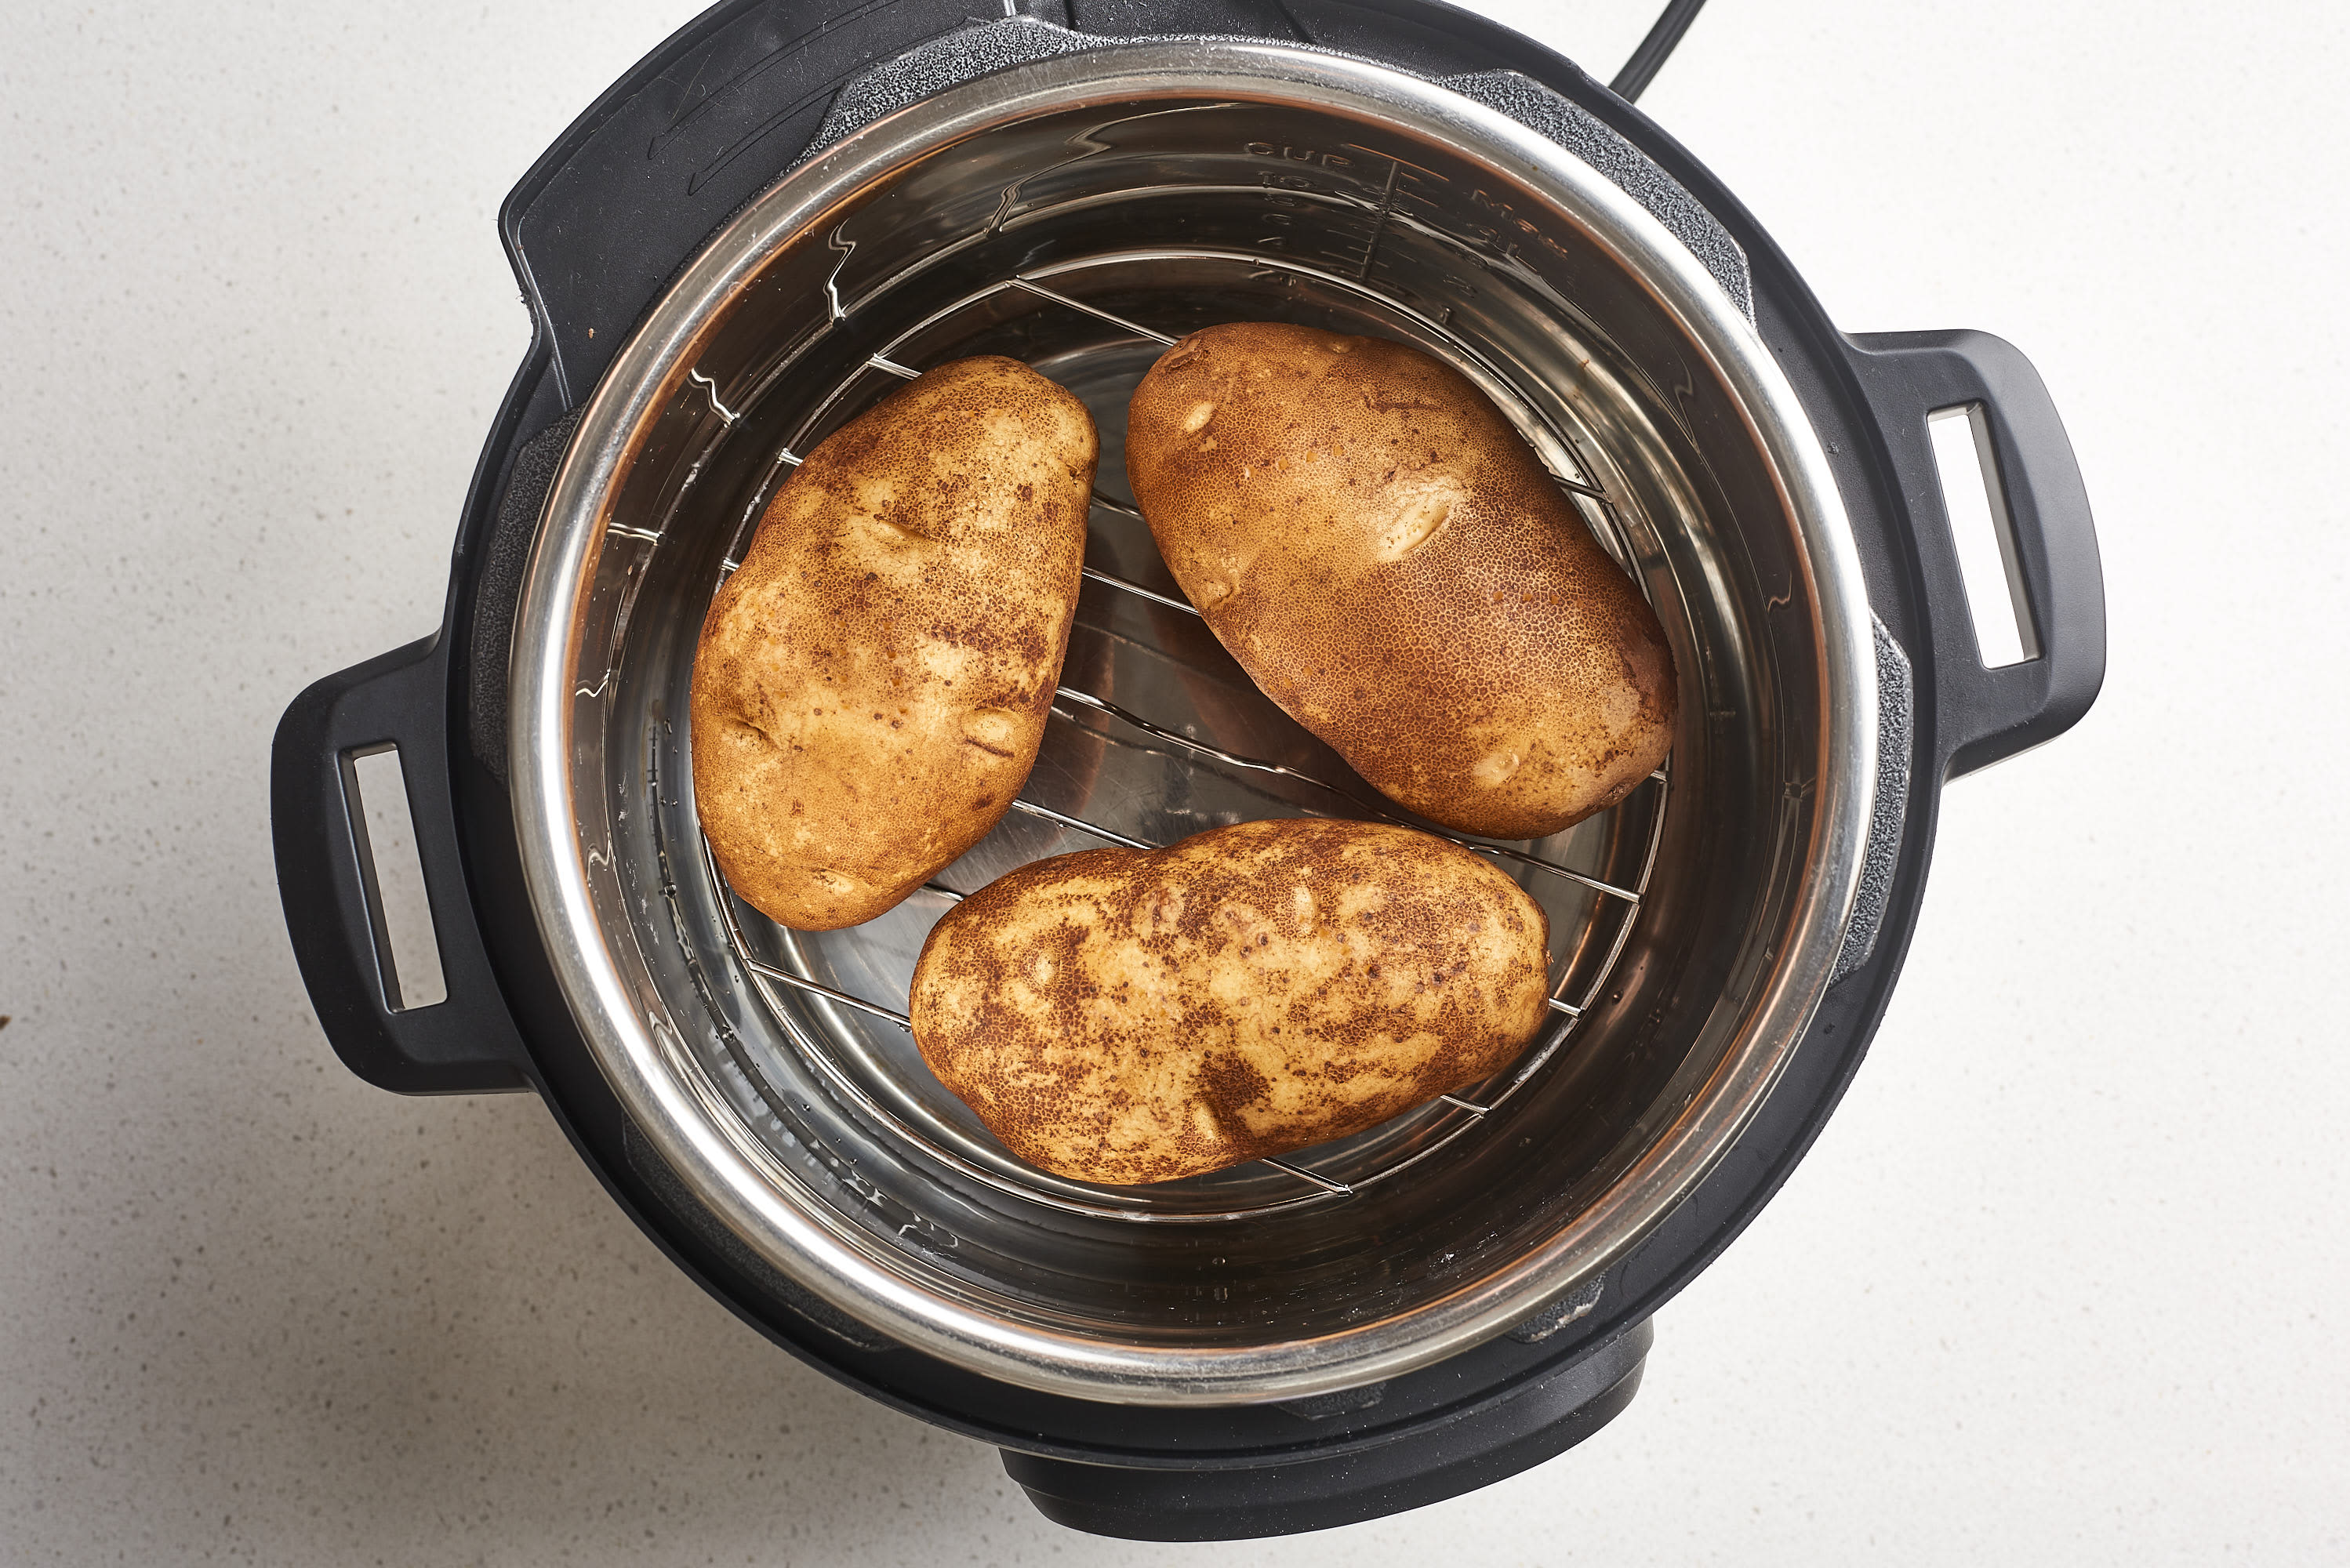 Does the Instant Pot kill nutrients in your food? - CNET